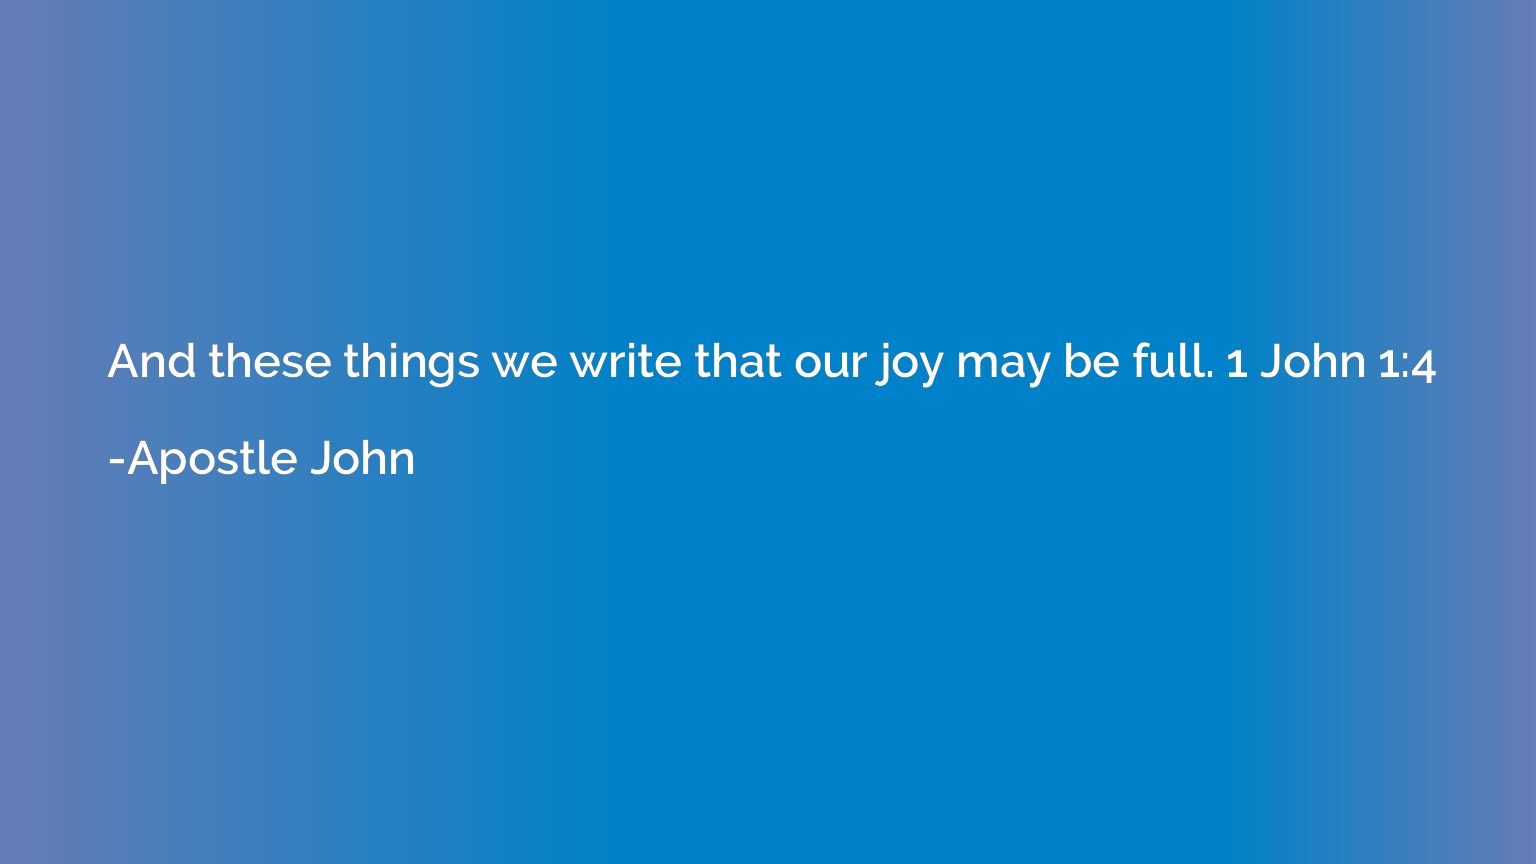 And these things we write that our joy may be full. 1 John 1